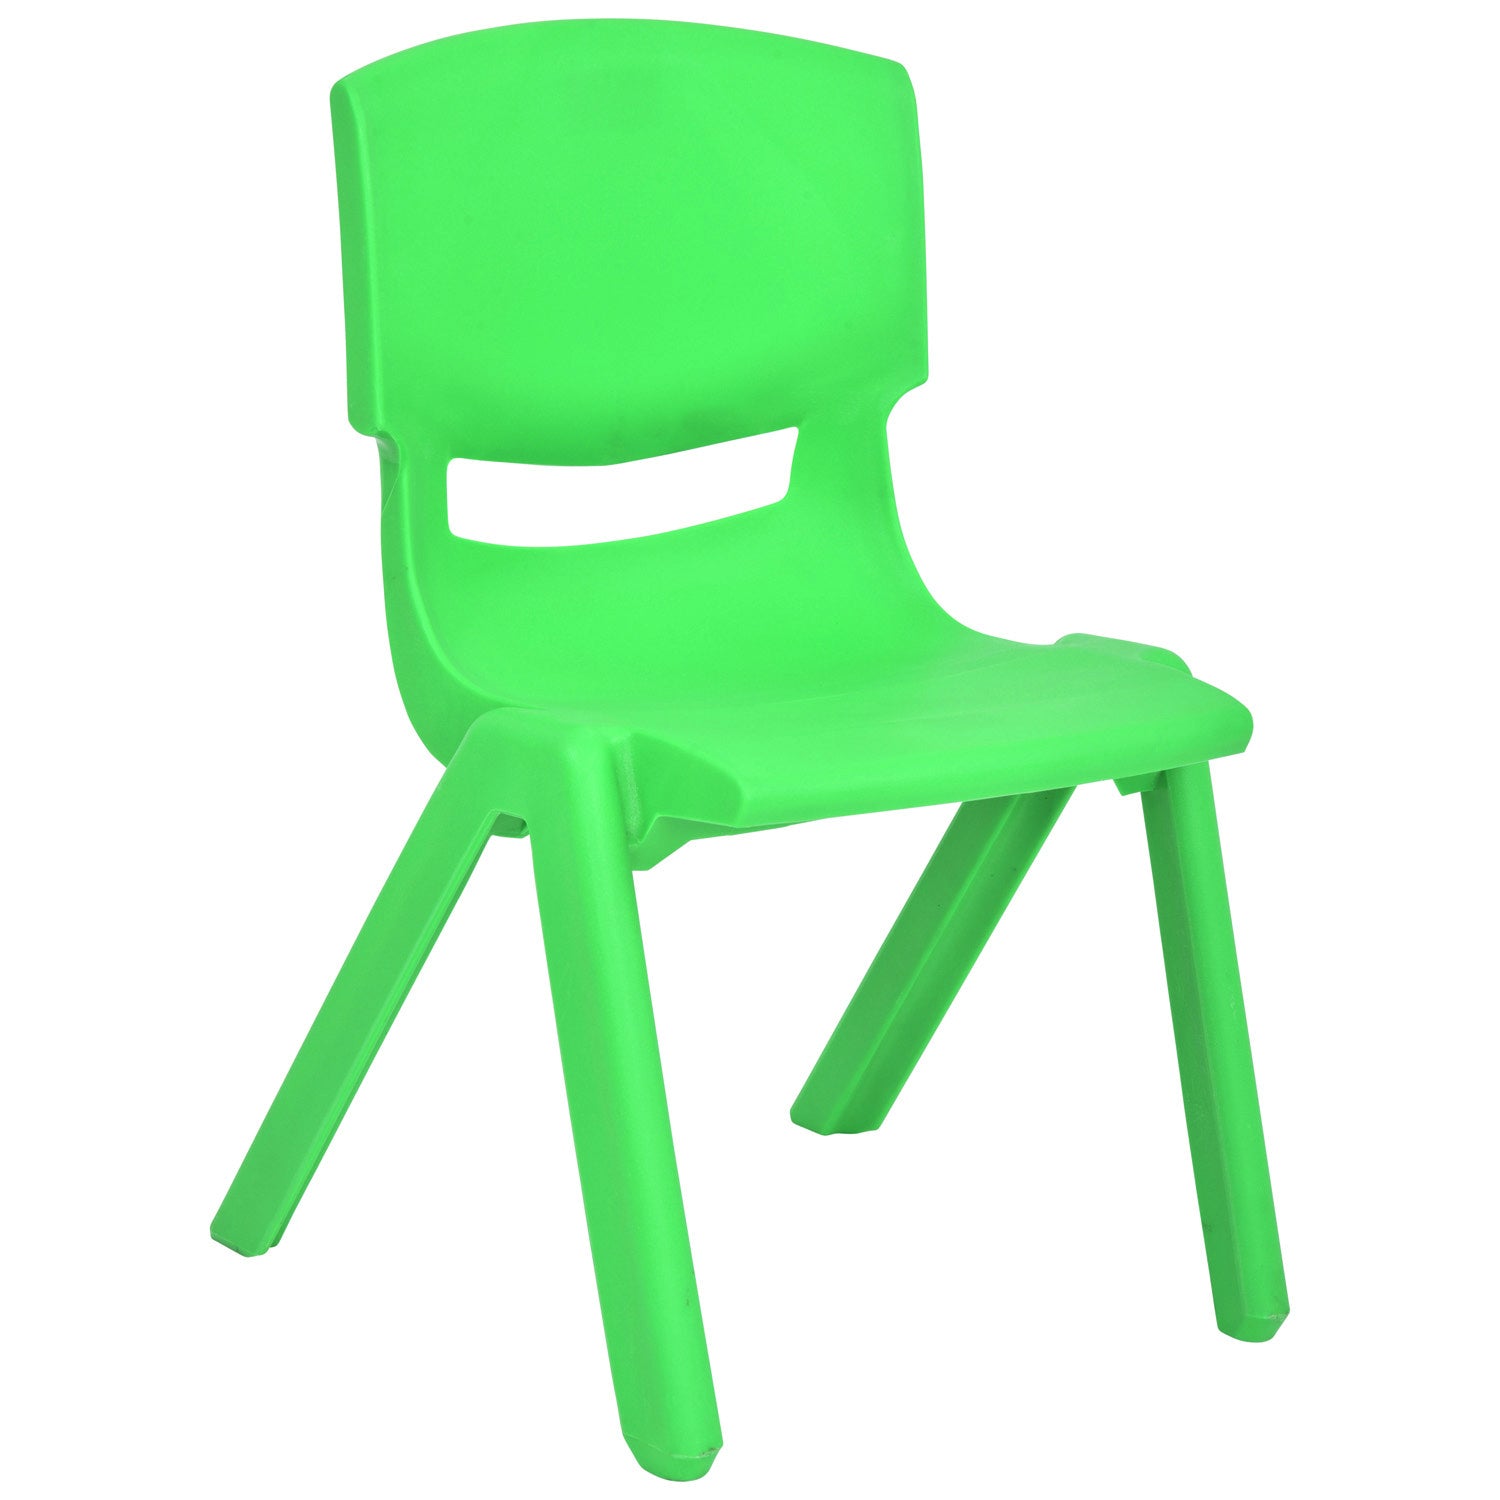 JOON Stackable Plastic Kids Learning Chairs, Green, 20.5x12.75X11 Inches, 2-Pack (Pack of 2)